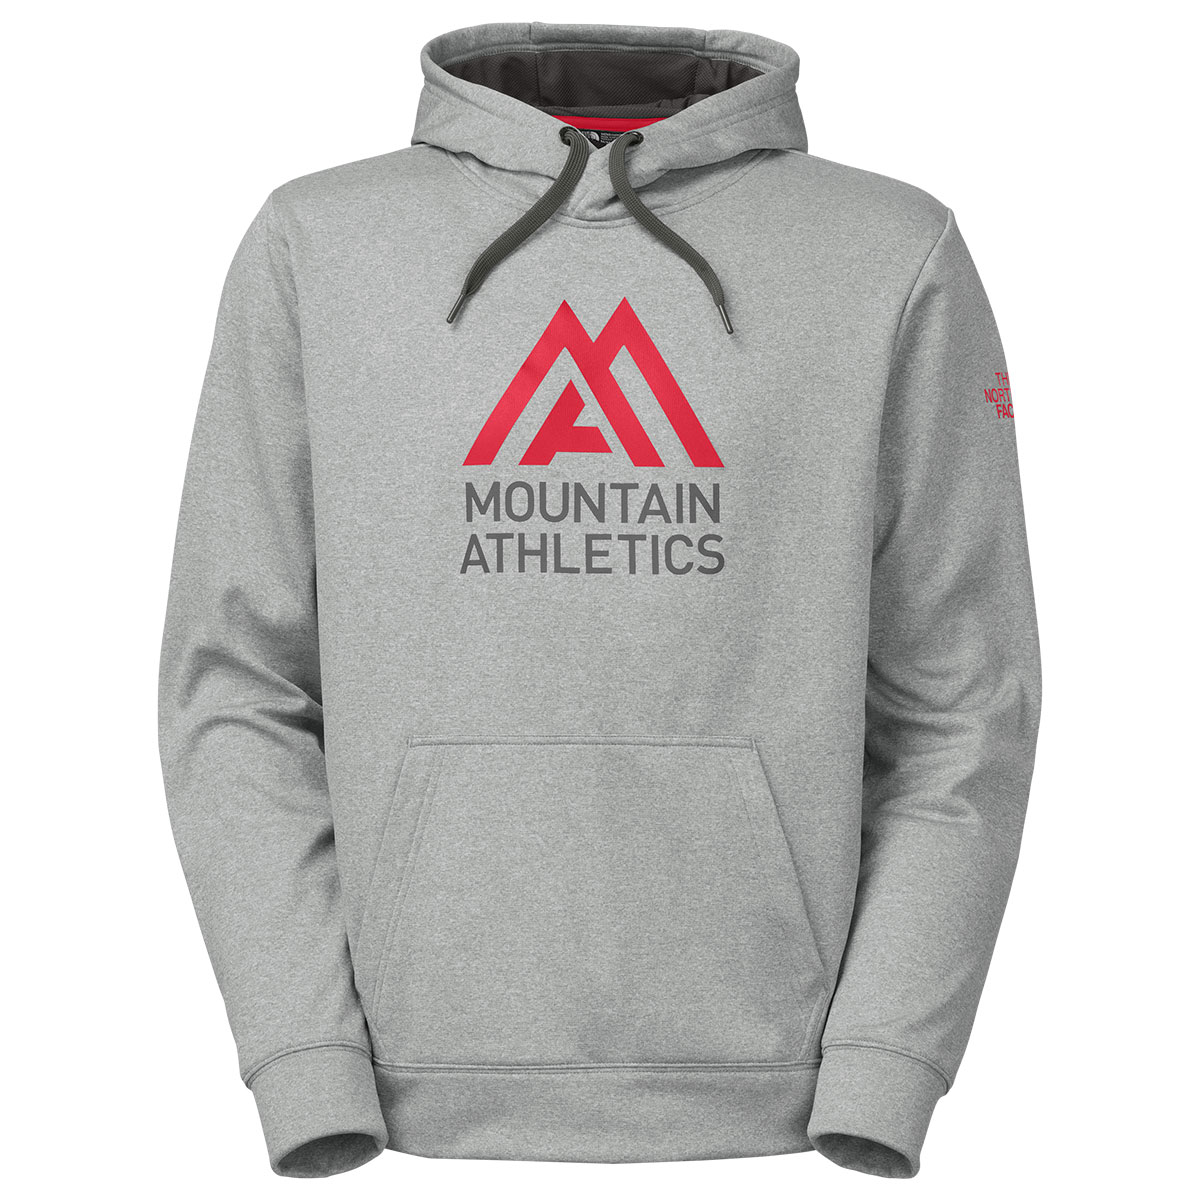 domesticeren raken meel THE NORTH FACE Men's MA Graphic Surgent Hoodie - Eastern Mountain Sports